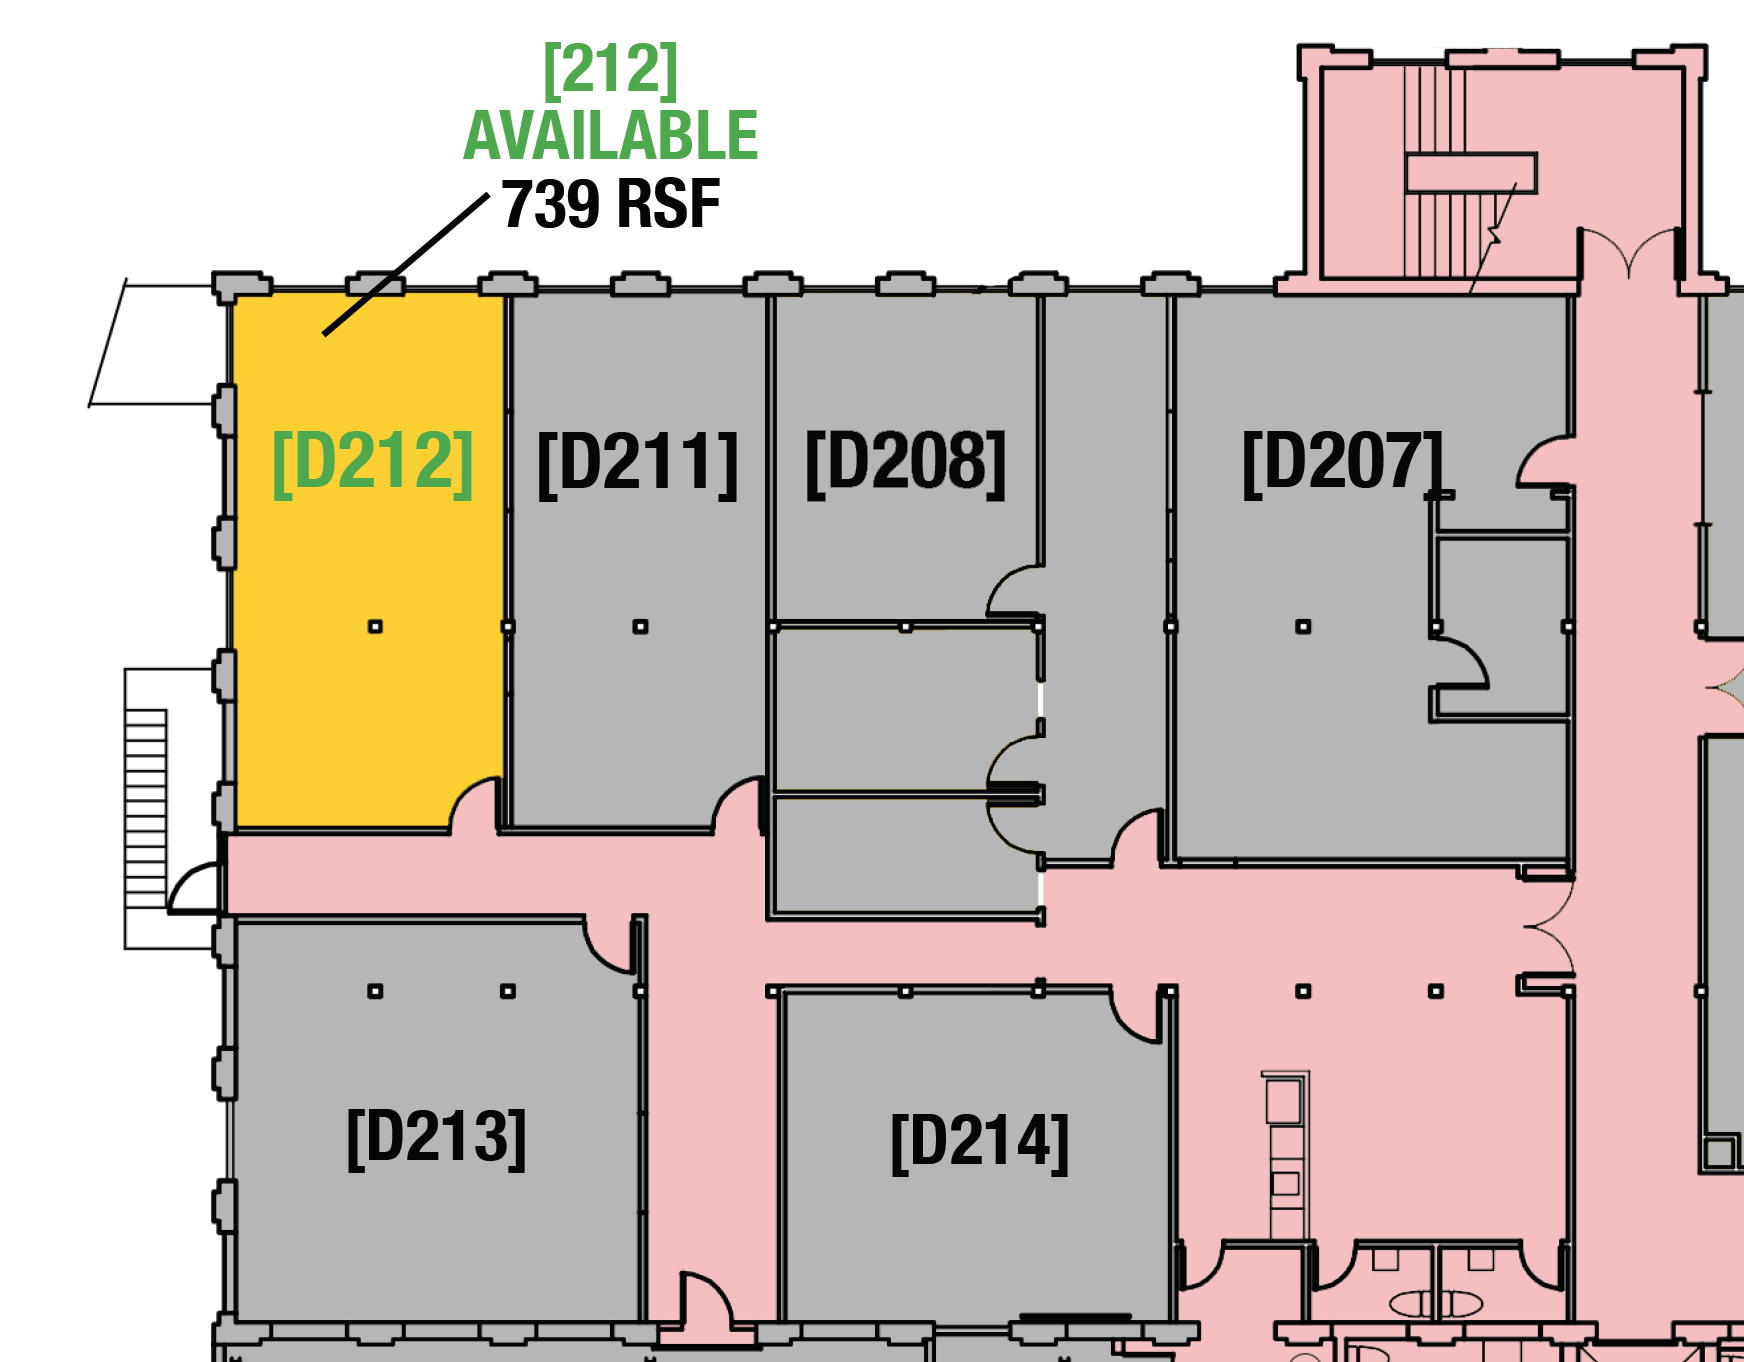 Mill One - SUITE 212 - 739 RSF